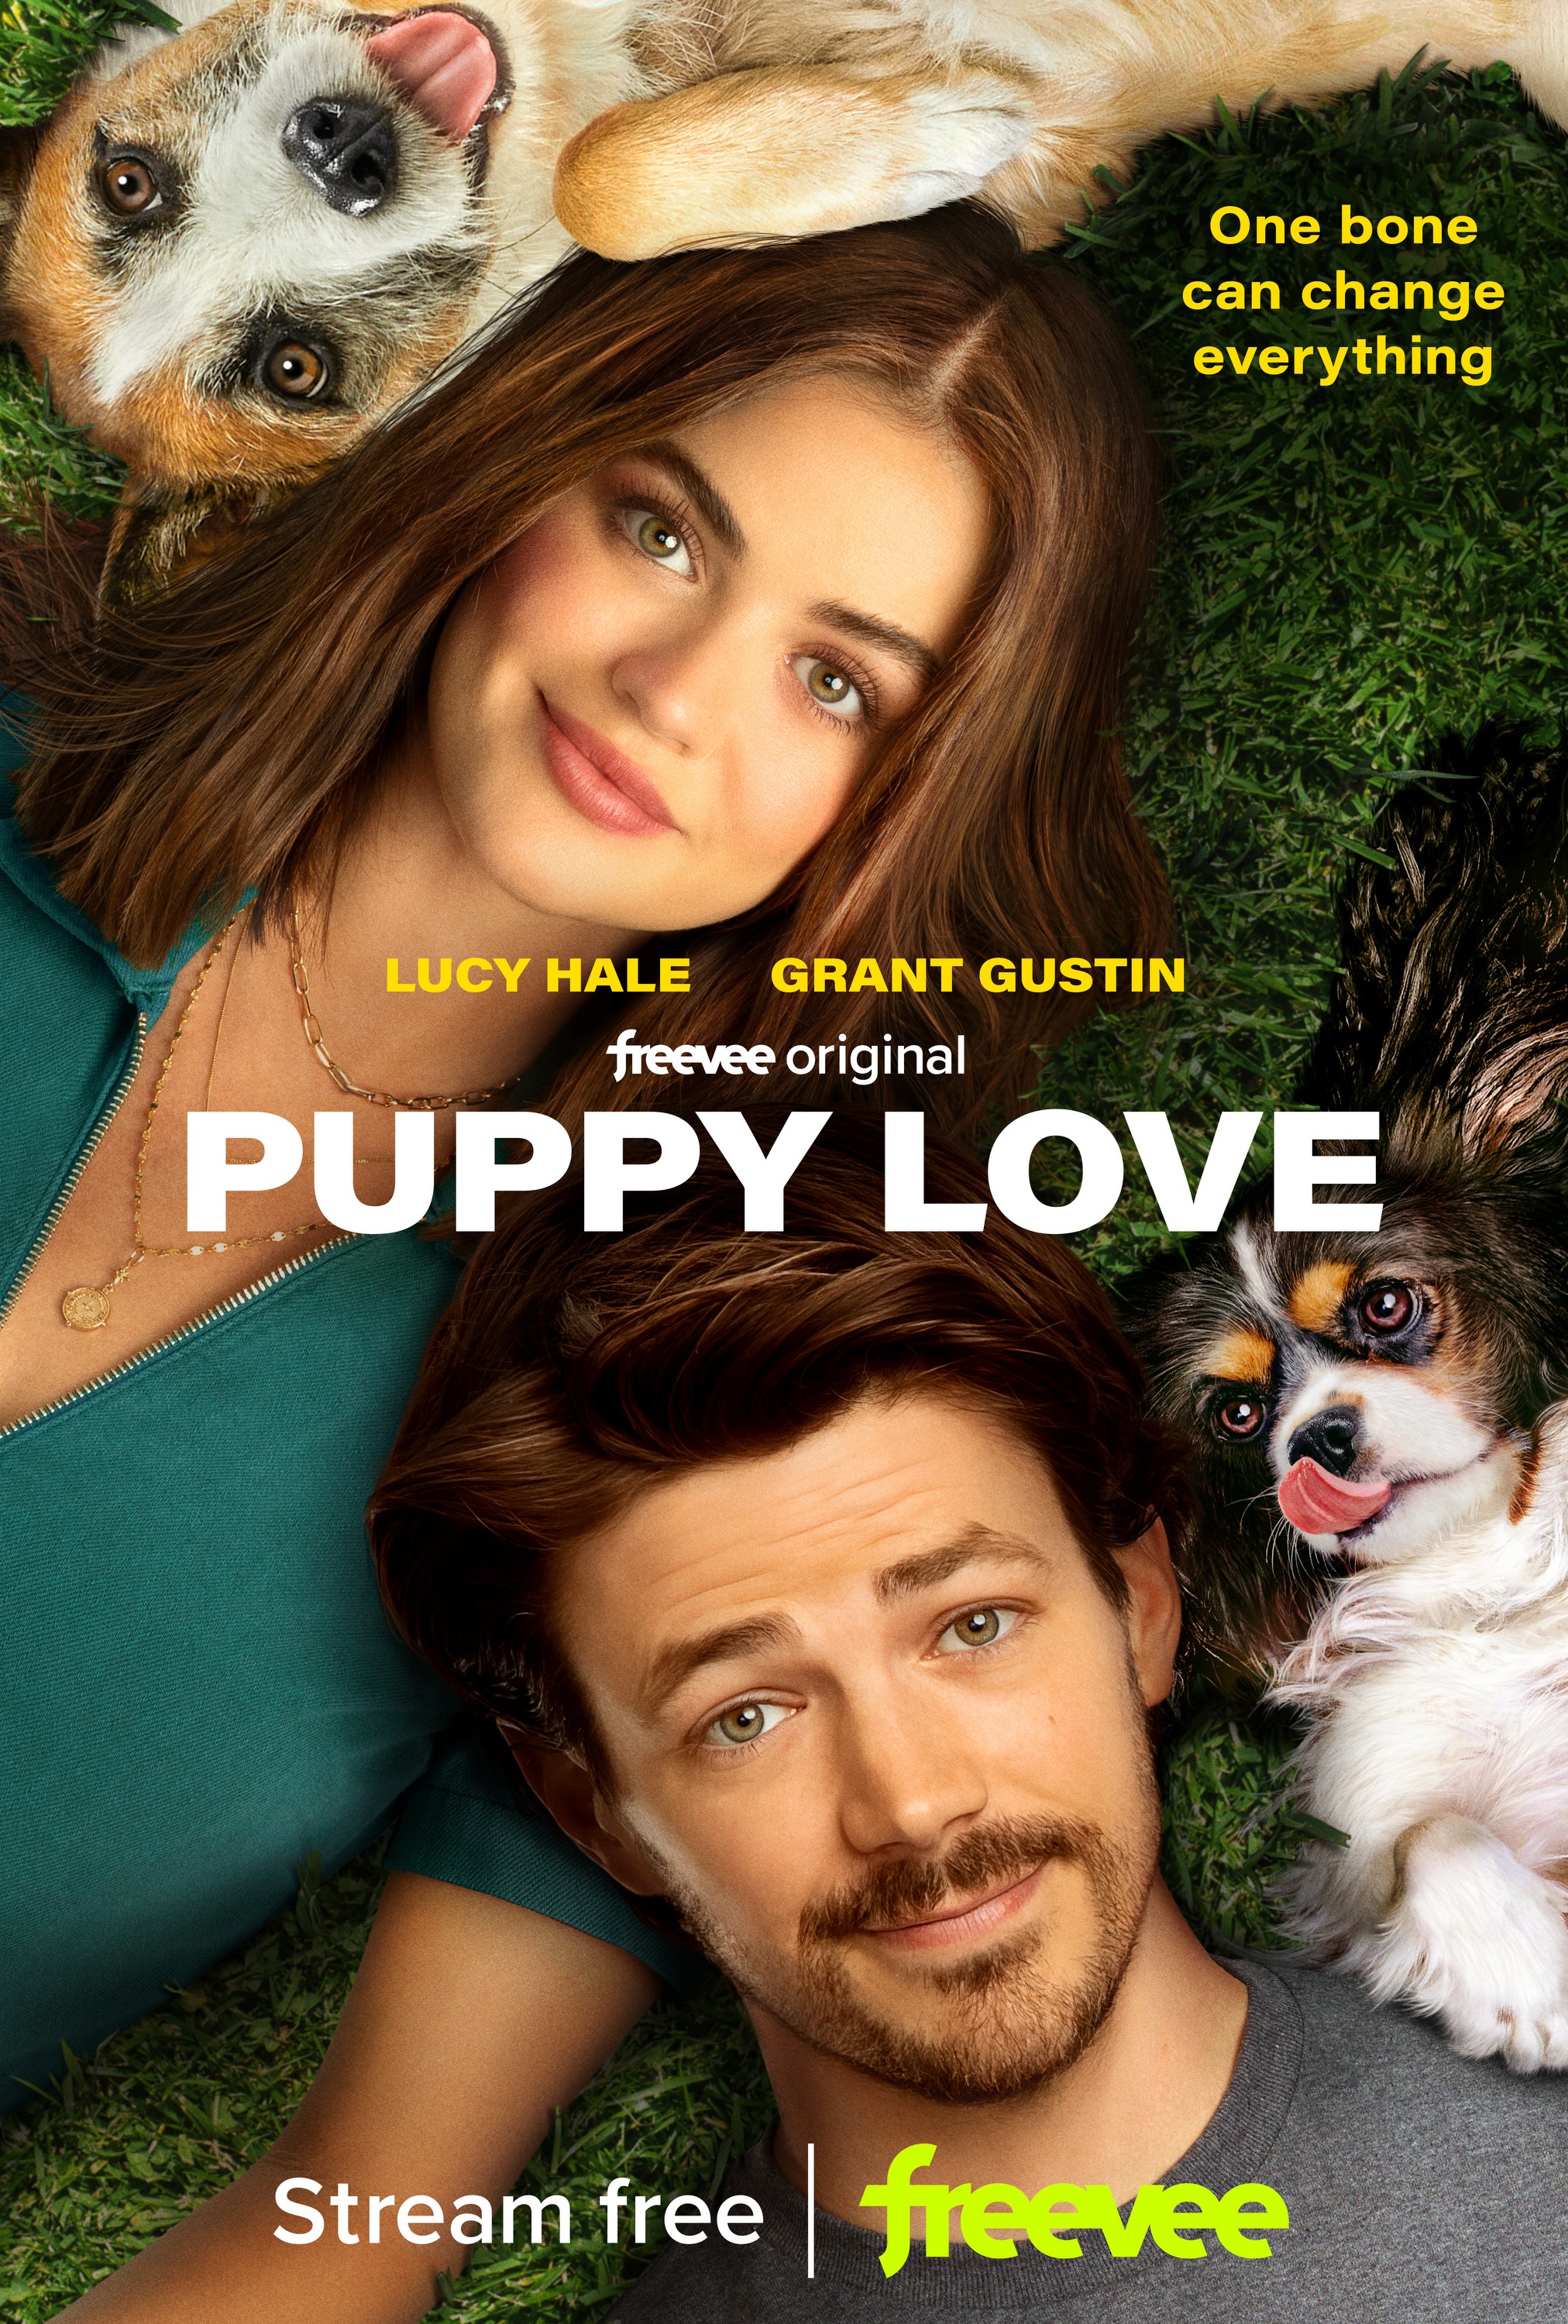 Puppy Love Trailer 1 Trailers & Videos Rotten Tomatoes